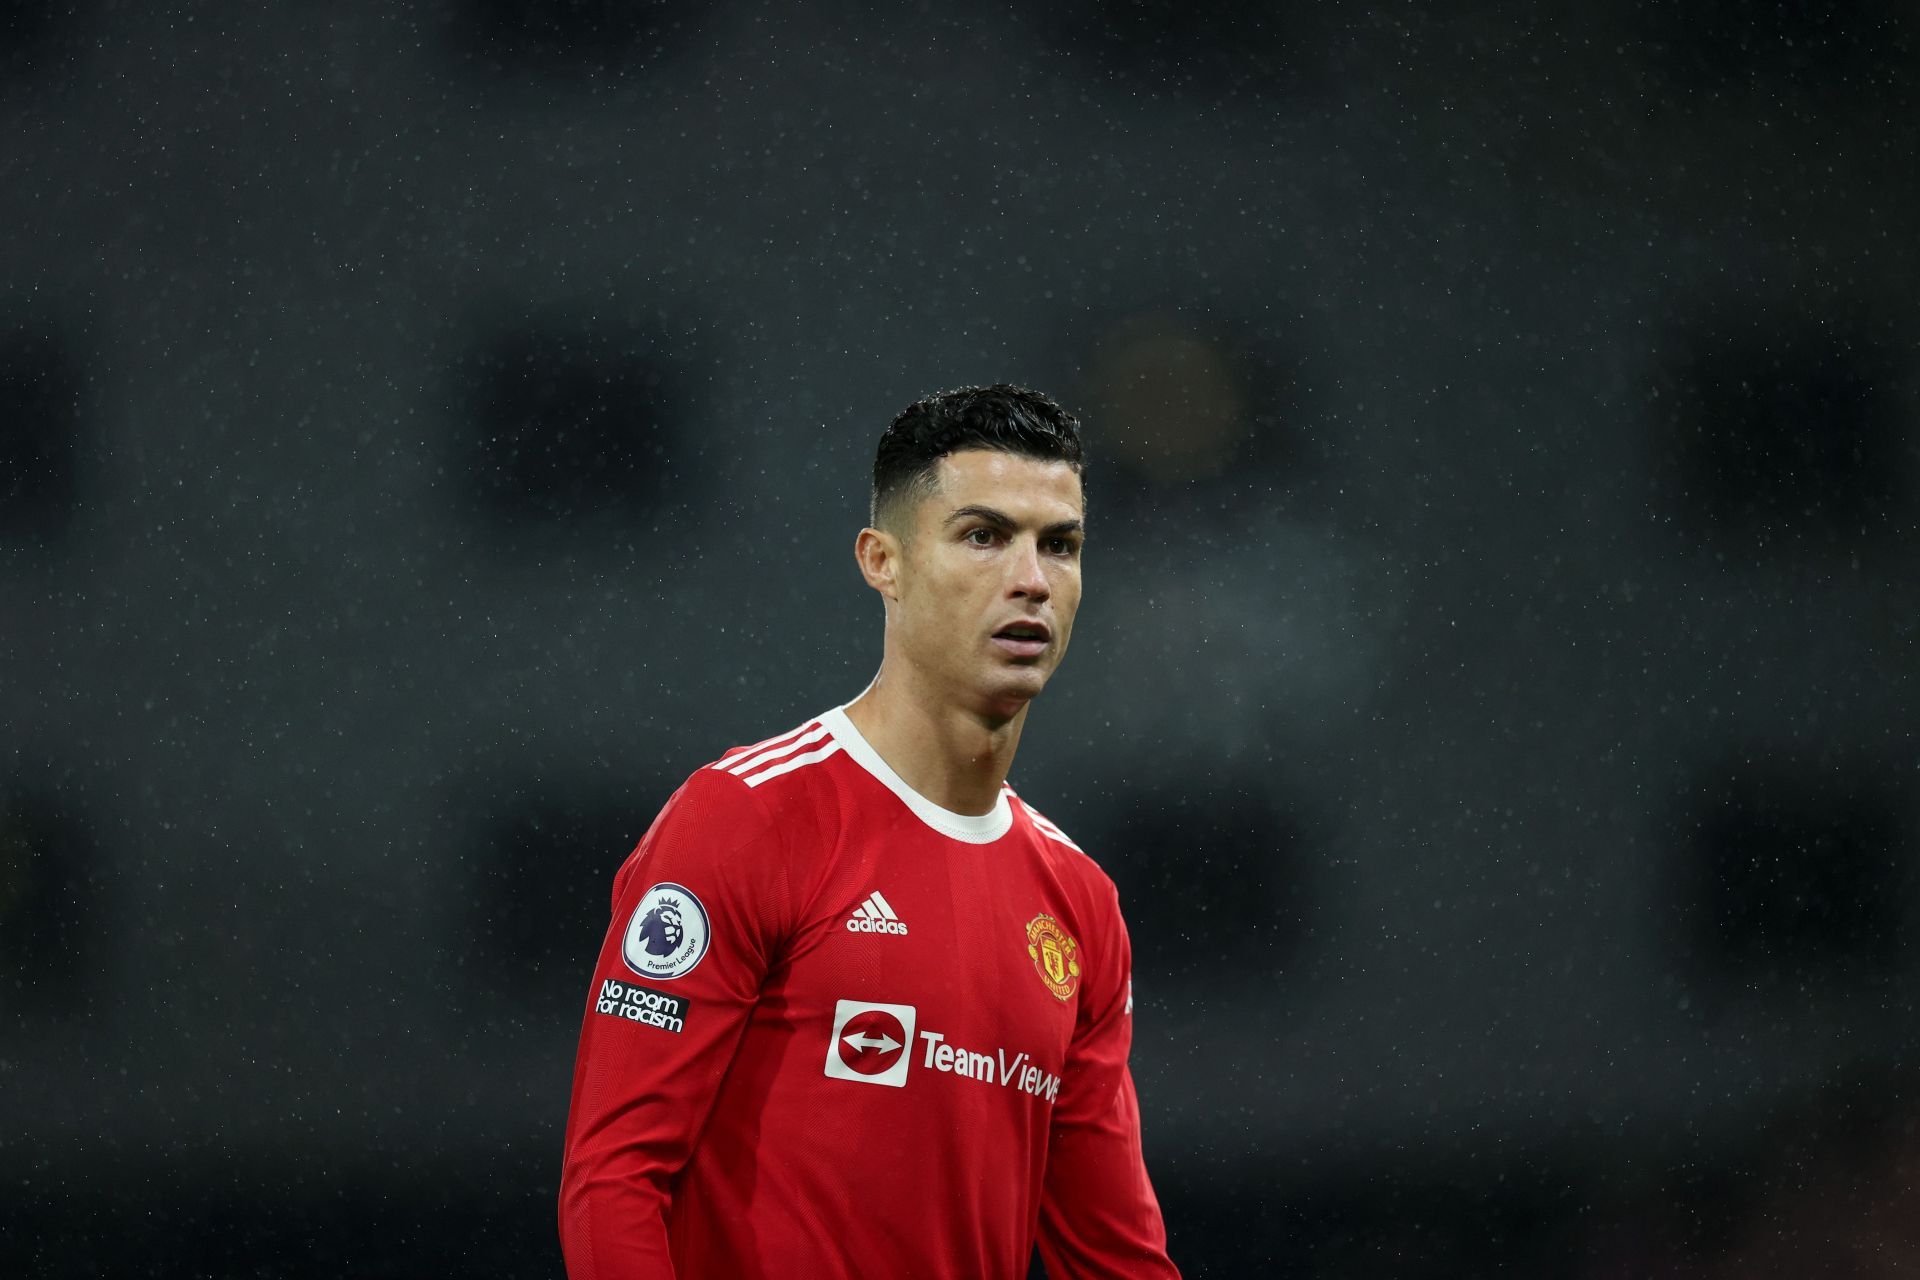 Cristiano Ronaldo returned to Manchester United this summer